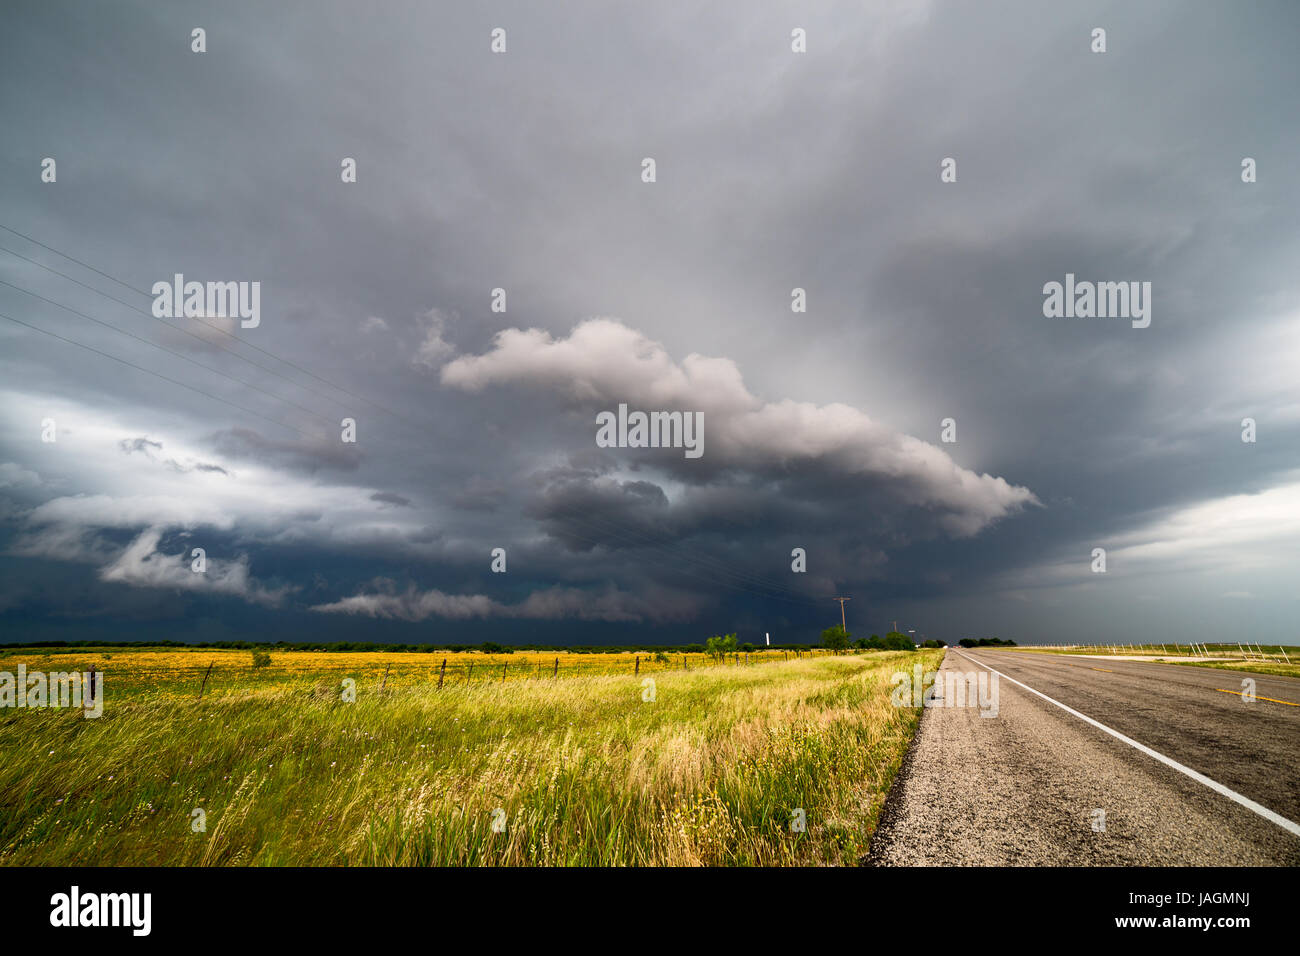 A severe thunderstorm with dark clouds rumbles across the plains near Rockwood, Texas Stock Photo